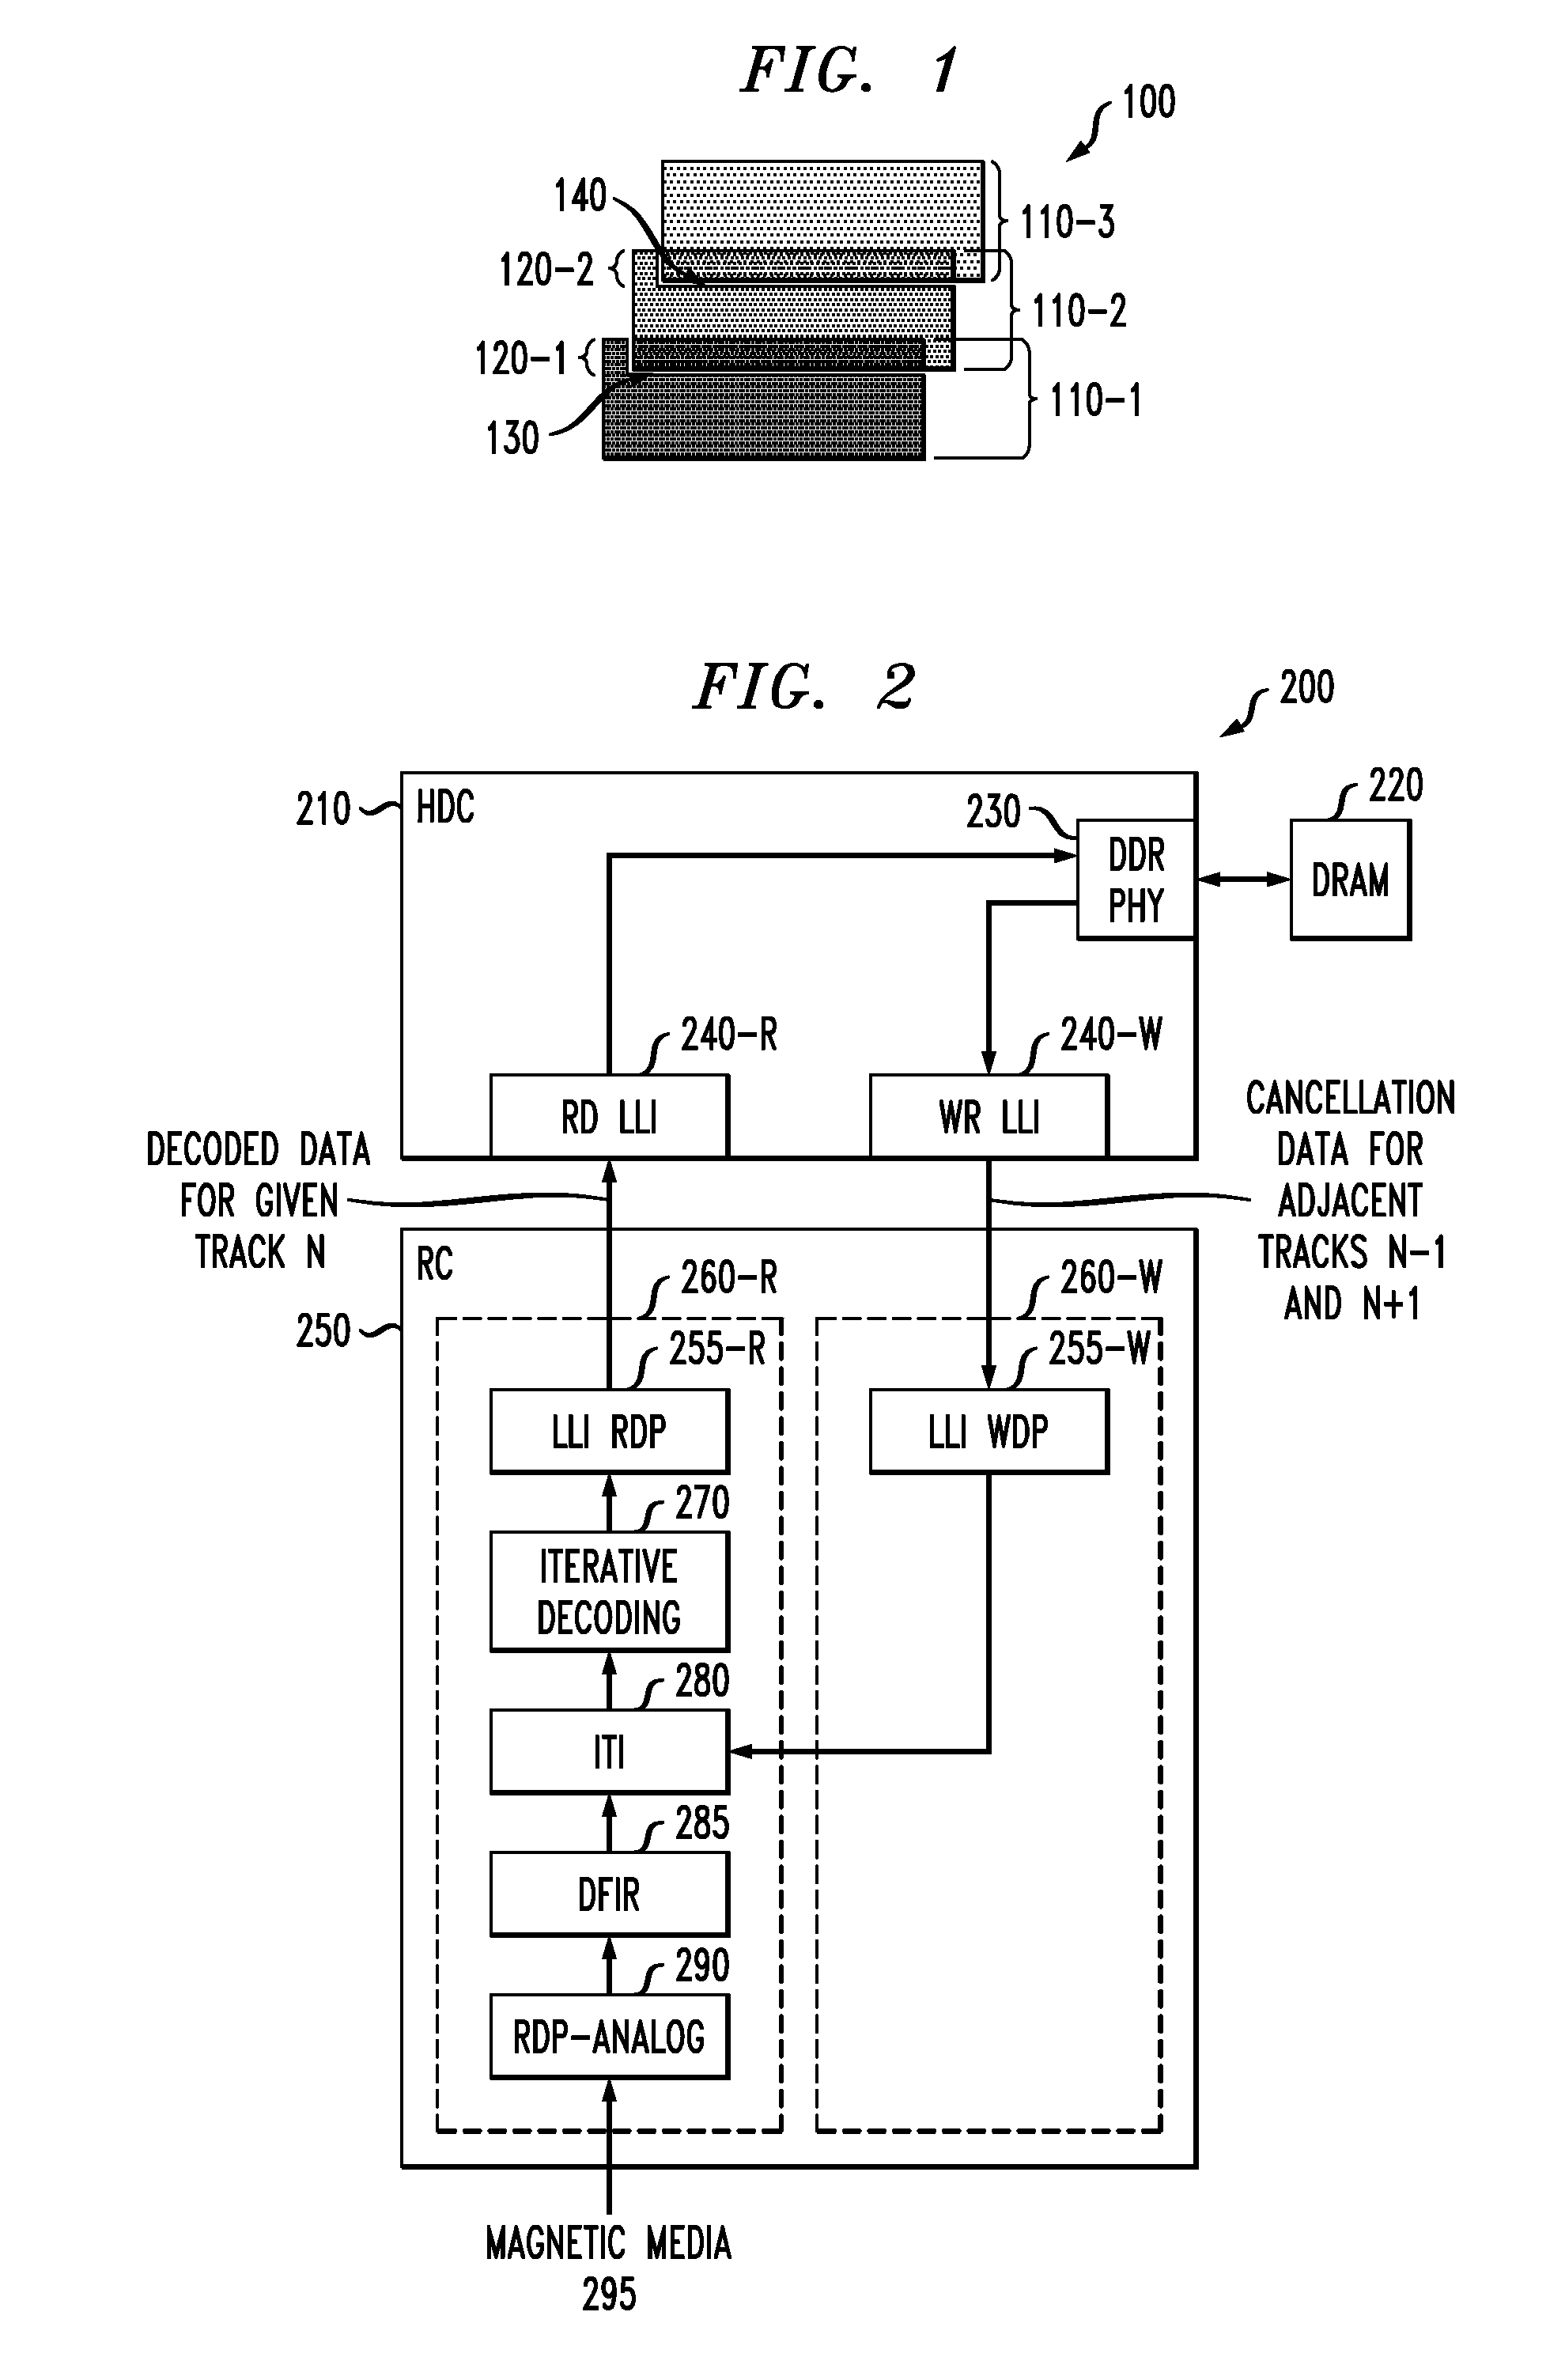 Inter-track interference mitigation in magnetic recording systems using averaged values